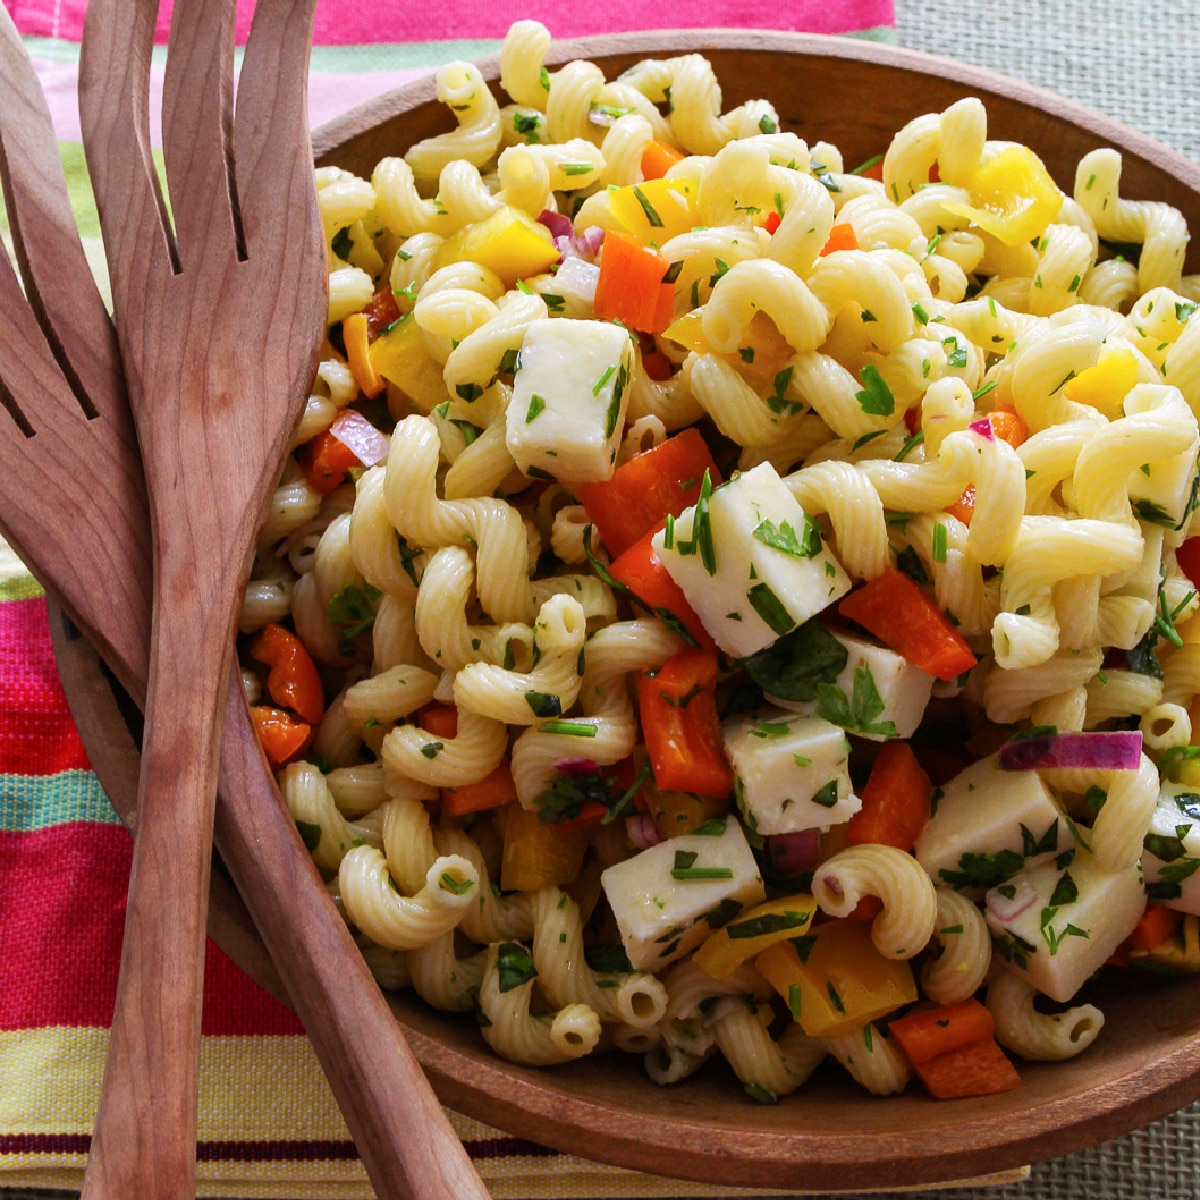 A wooden bowl filled with pasta salad and wooden serving tongs.